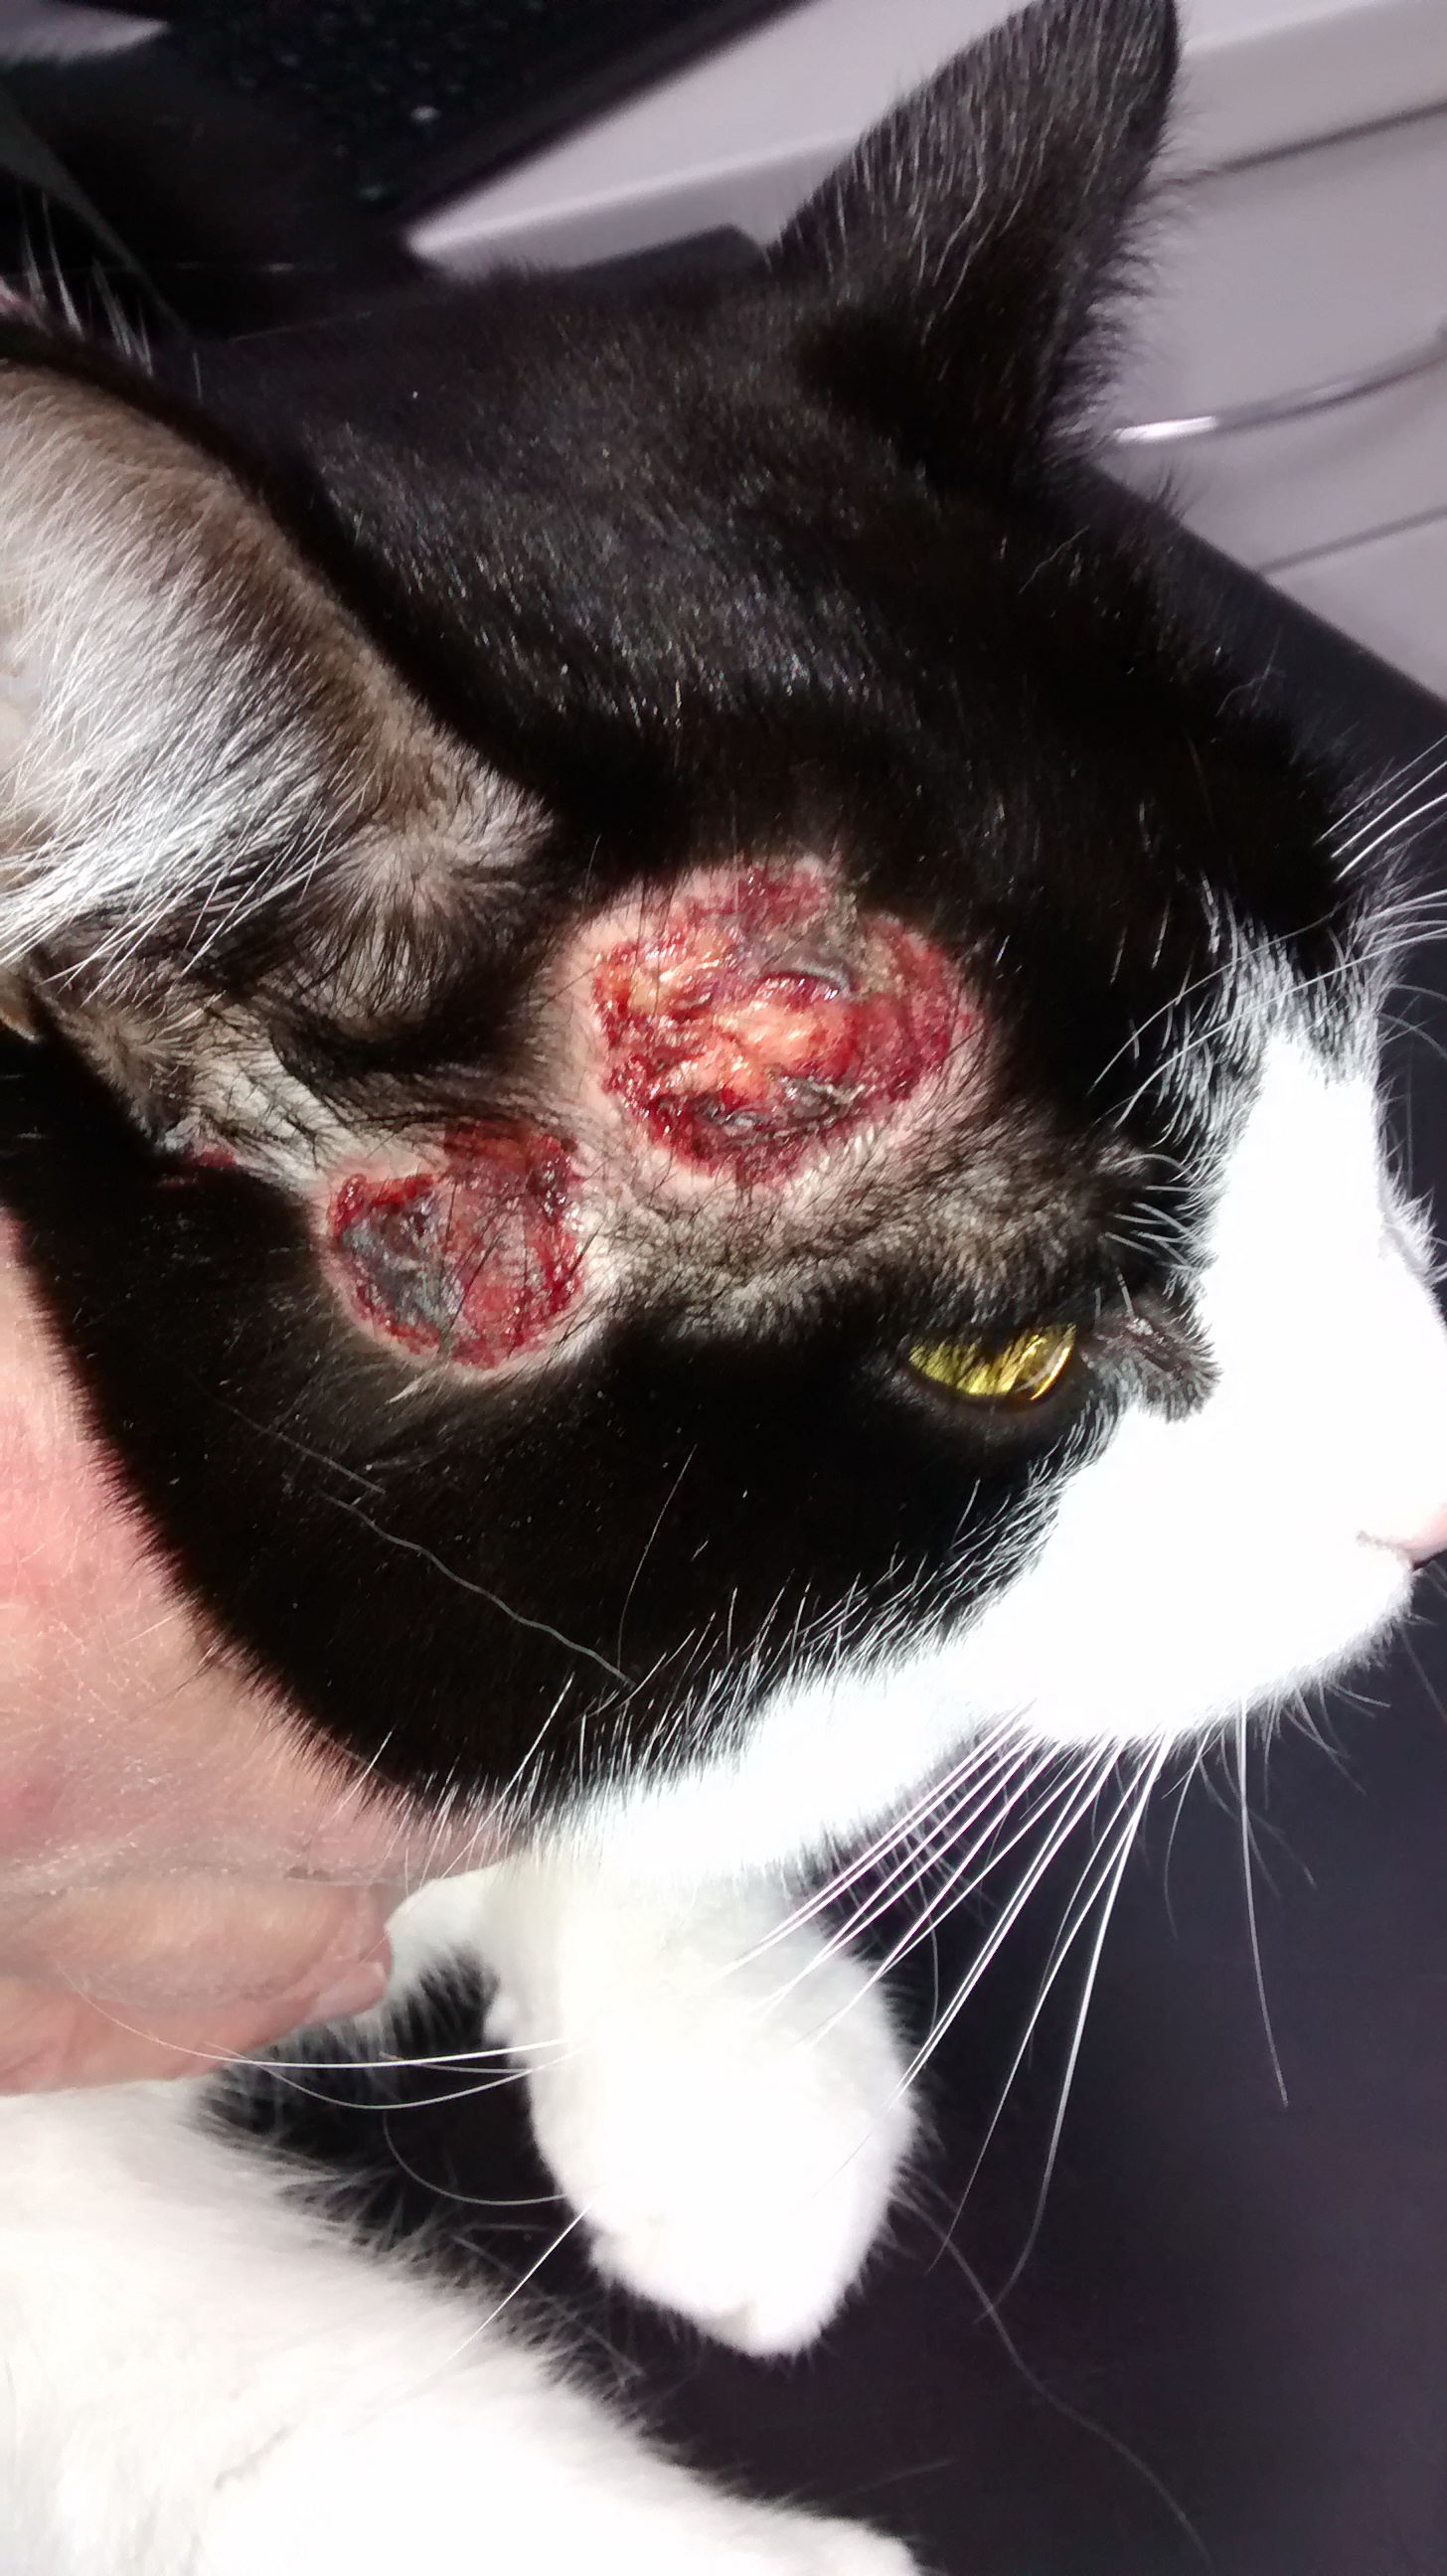 cutaneous adverse reaction to spironolactone: these lesions are intensely pruritic